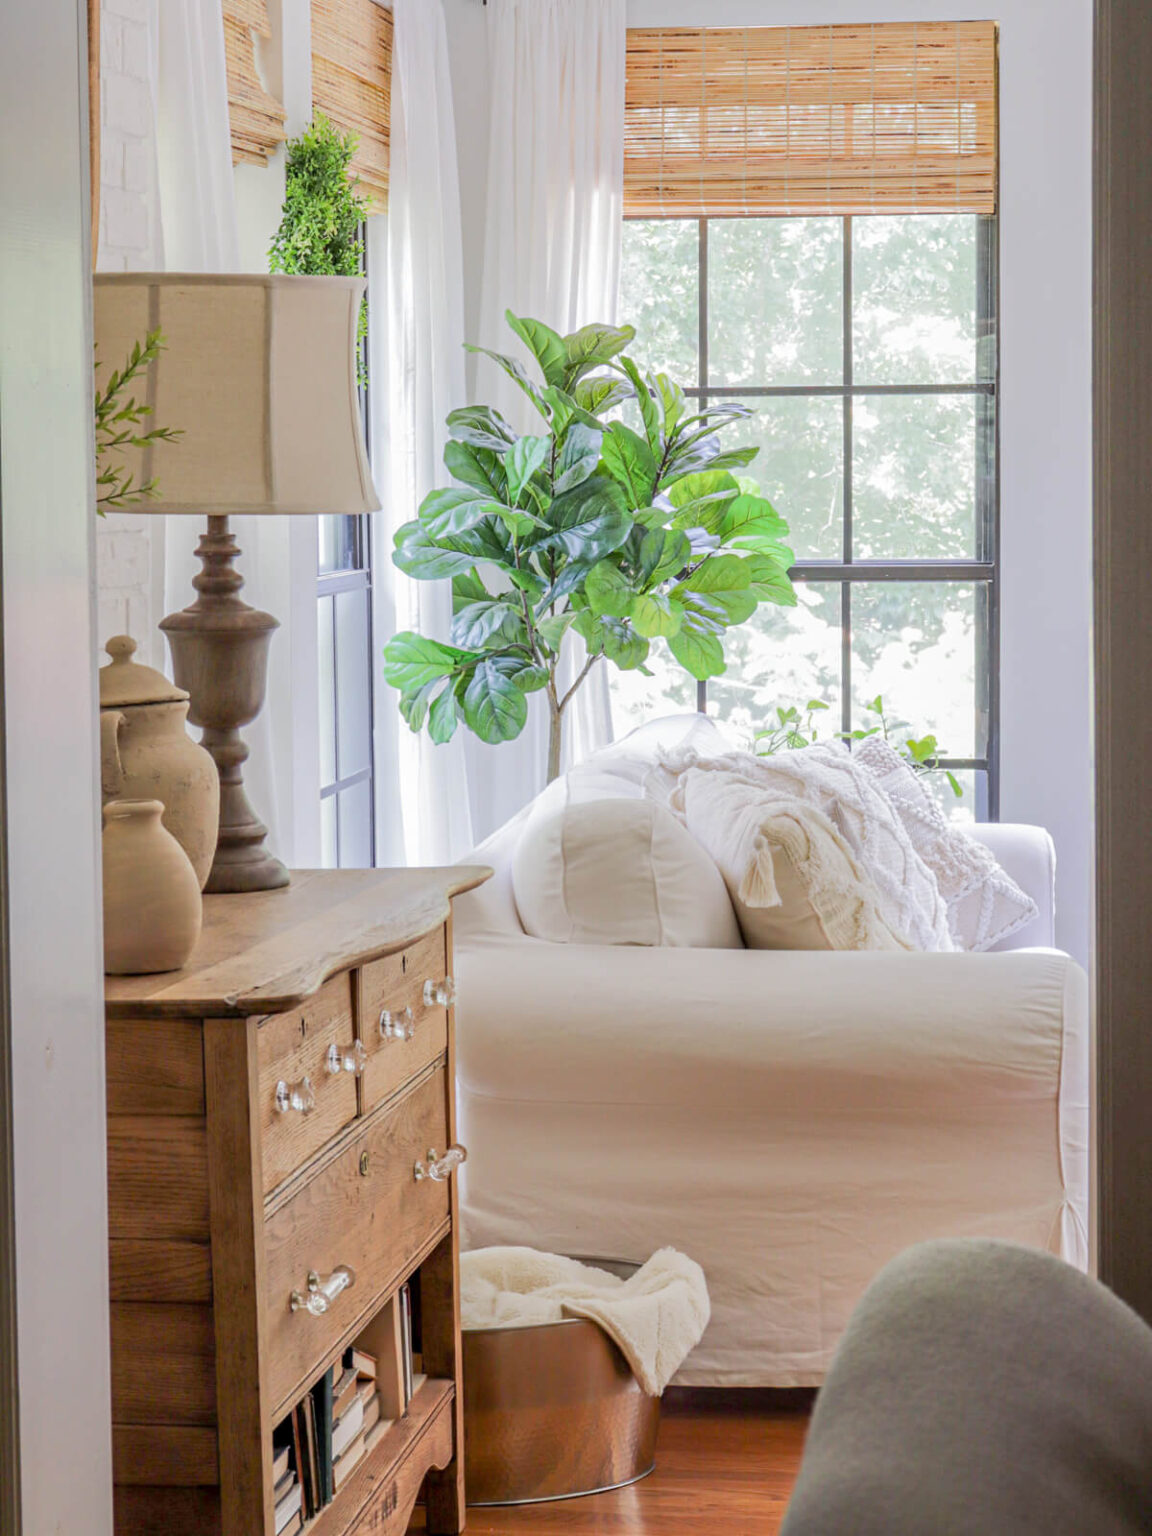 Summer Simplicity Home Tour - Your Home Renewed